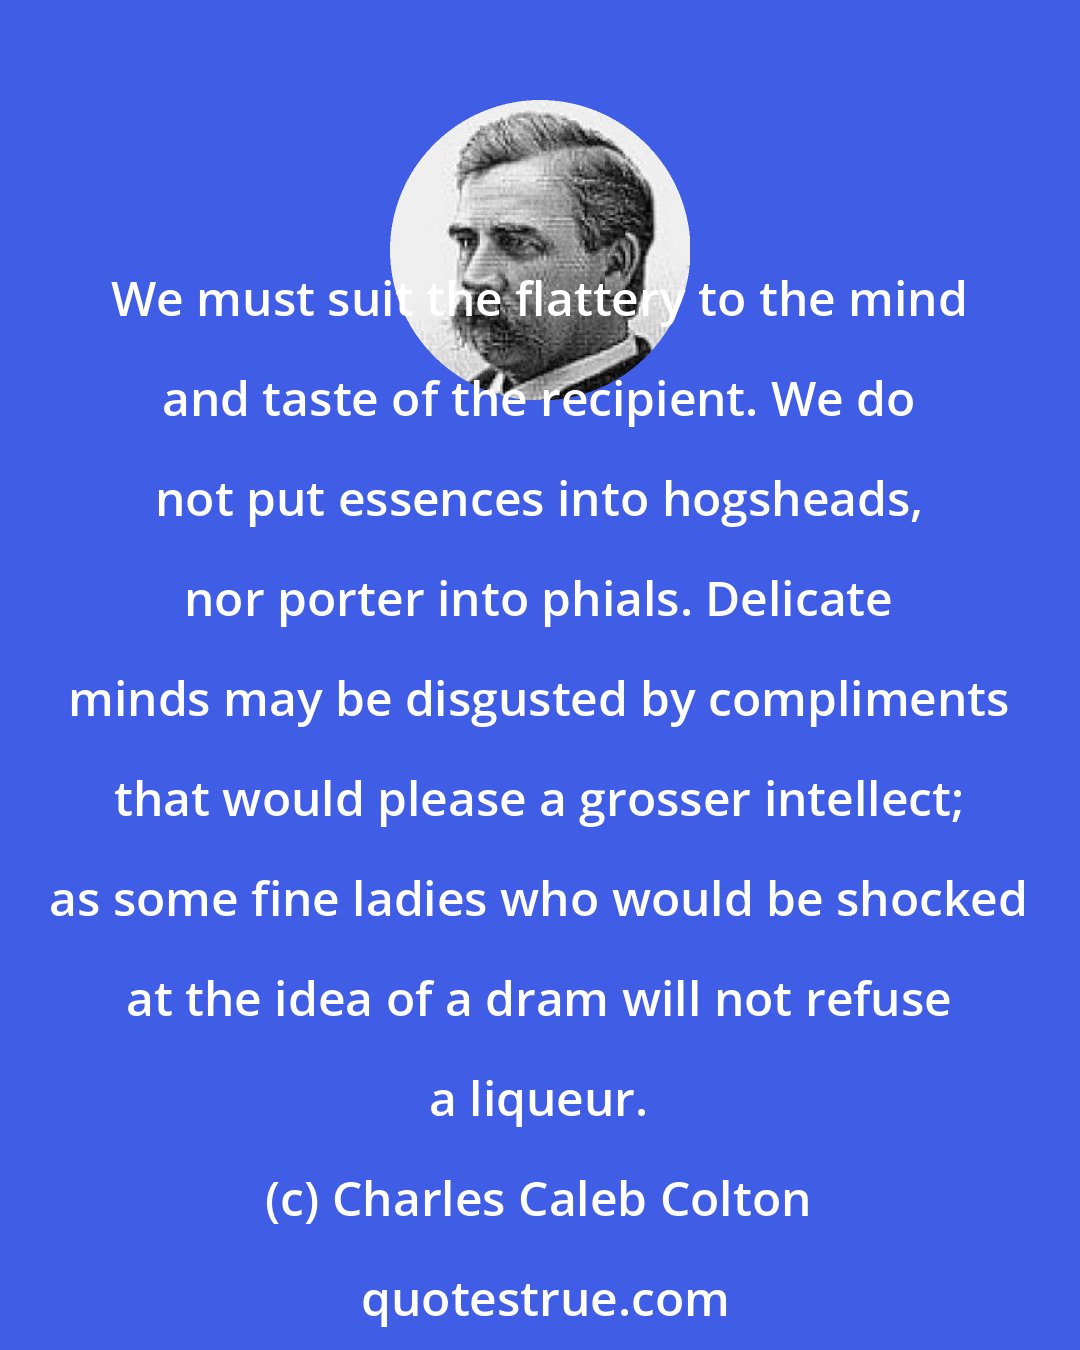 Charles Caleb Colton: We must suit the flattery to the mind and taste of the recipient. We do not put essences into hogsheads, nor porter into phials. Delicate minds may be disgusted by compliments that would please a grosser intellect; as some fine ladies who would be shocked at the idea of a dram will not refuse a liqueur.